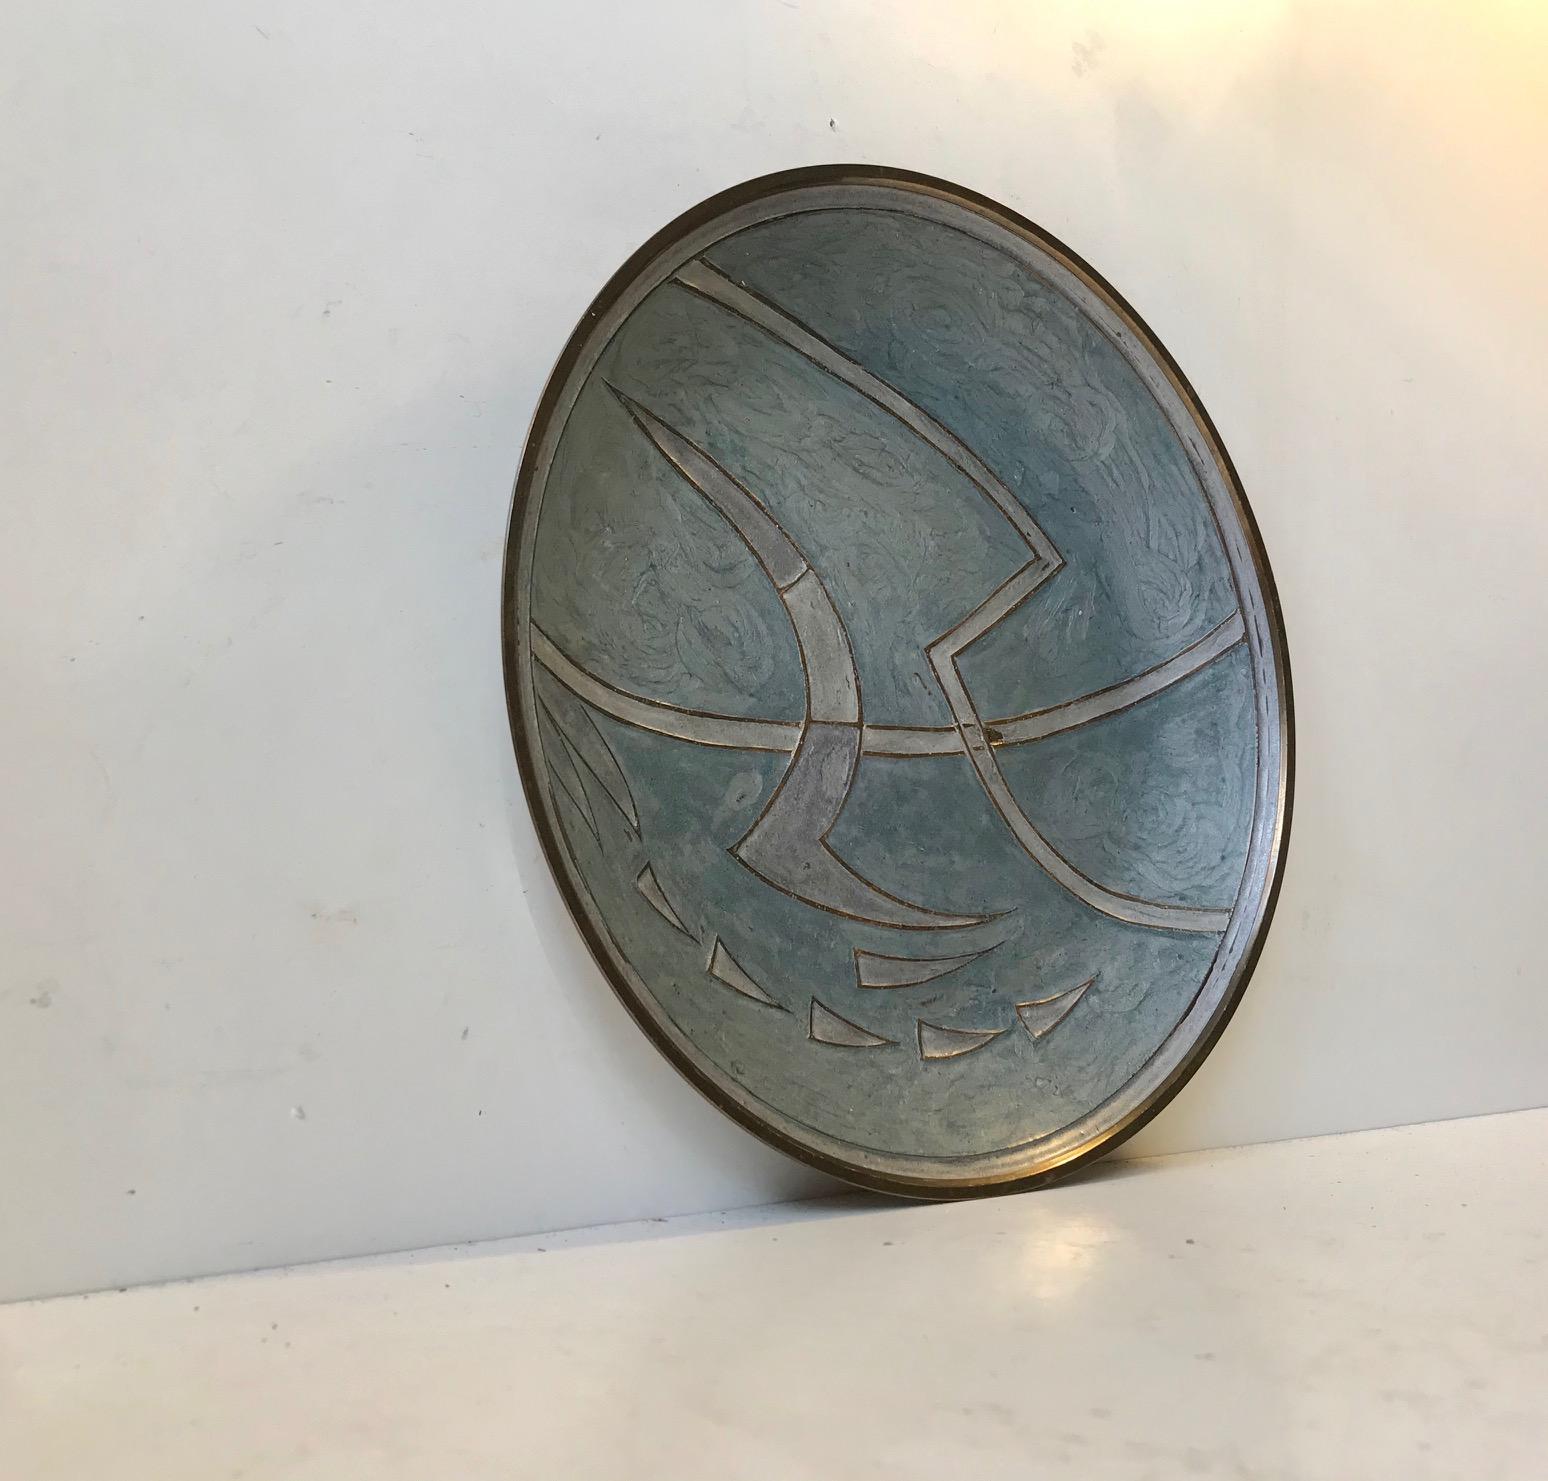 Patinated brass charger dish with abstract - Brutalist motif executed in hand applied enamel. Anonymous Scandinavian maker, circa 1950.